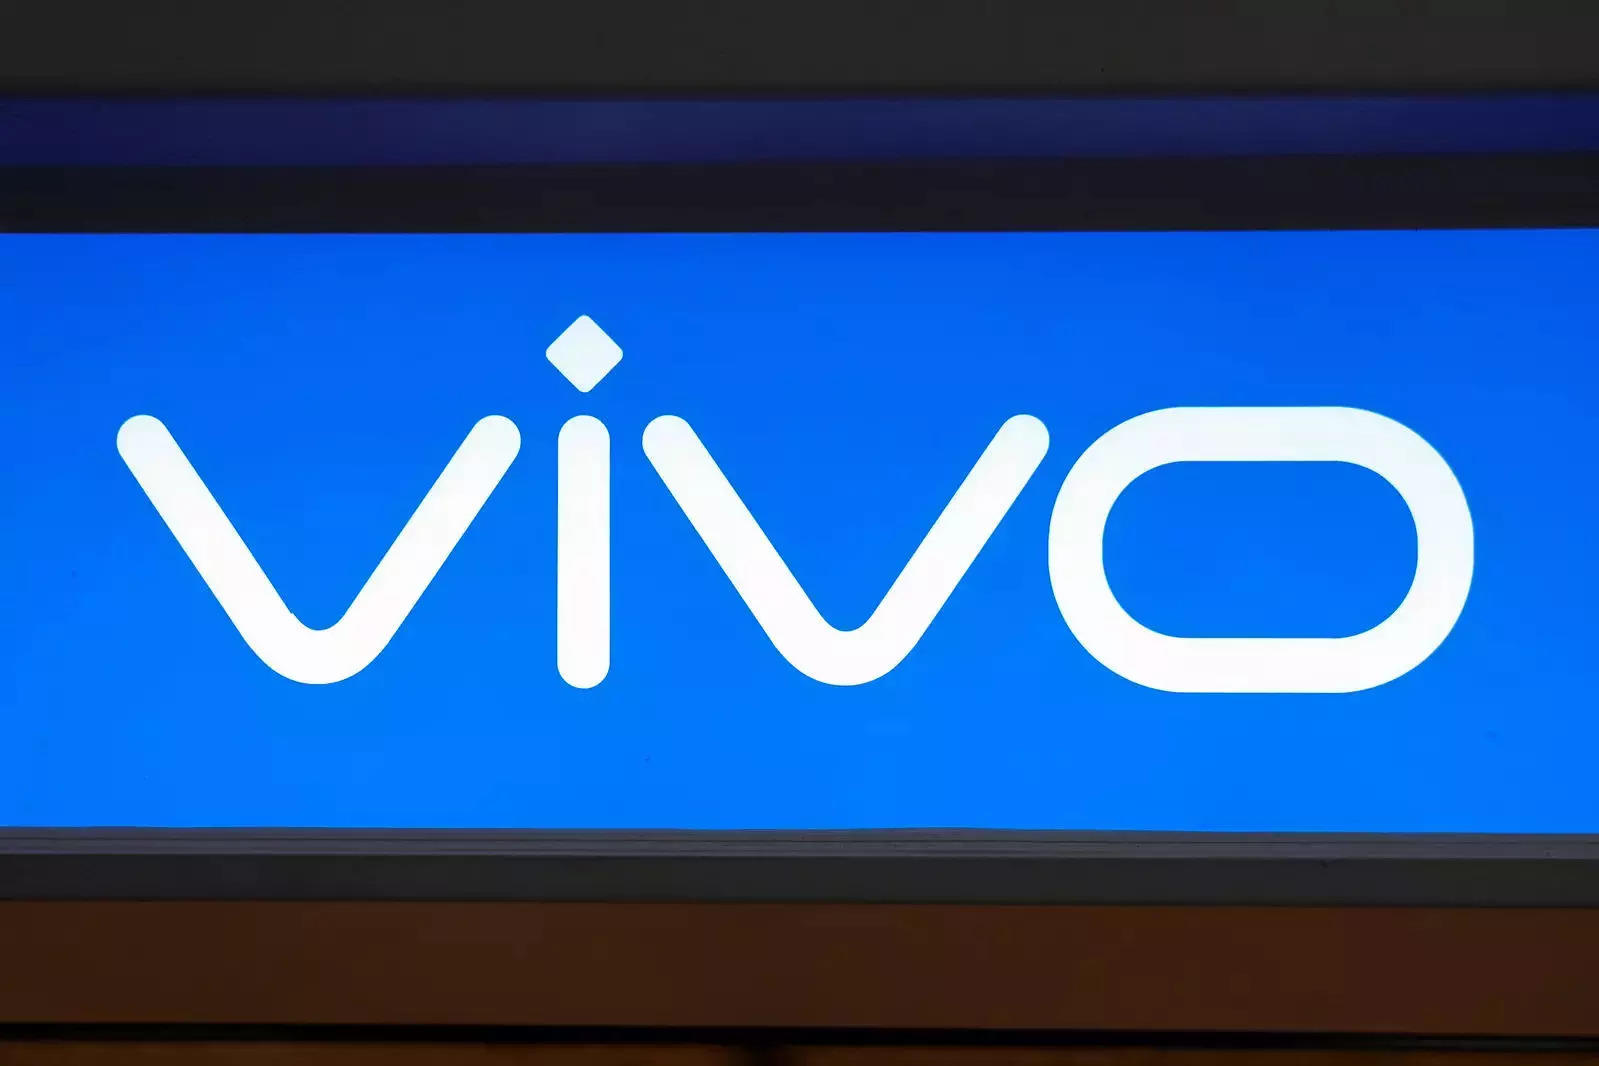 Chinese directors of company associated with Vivo flee as ED continues raids